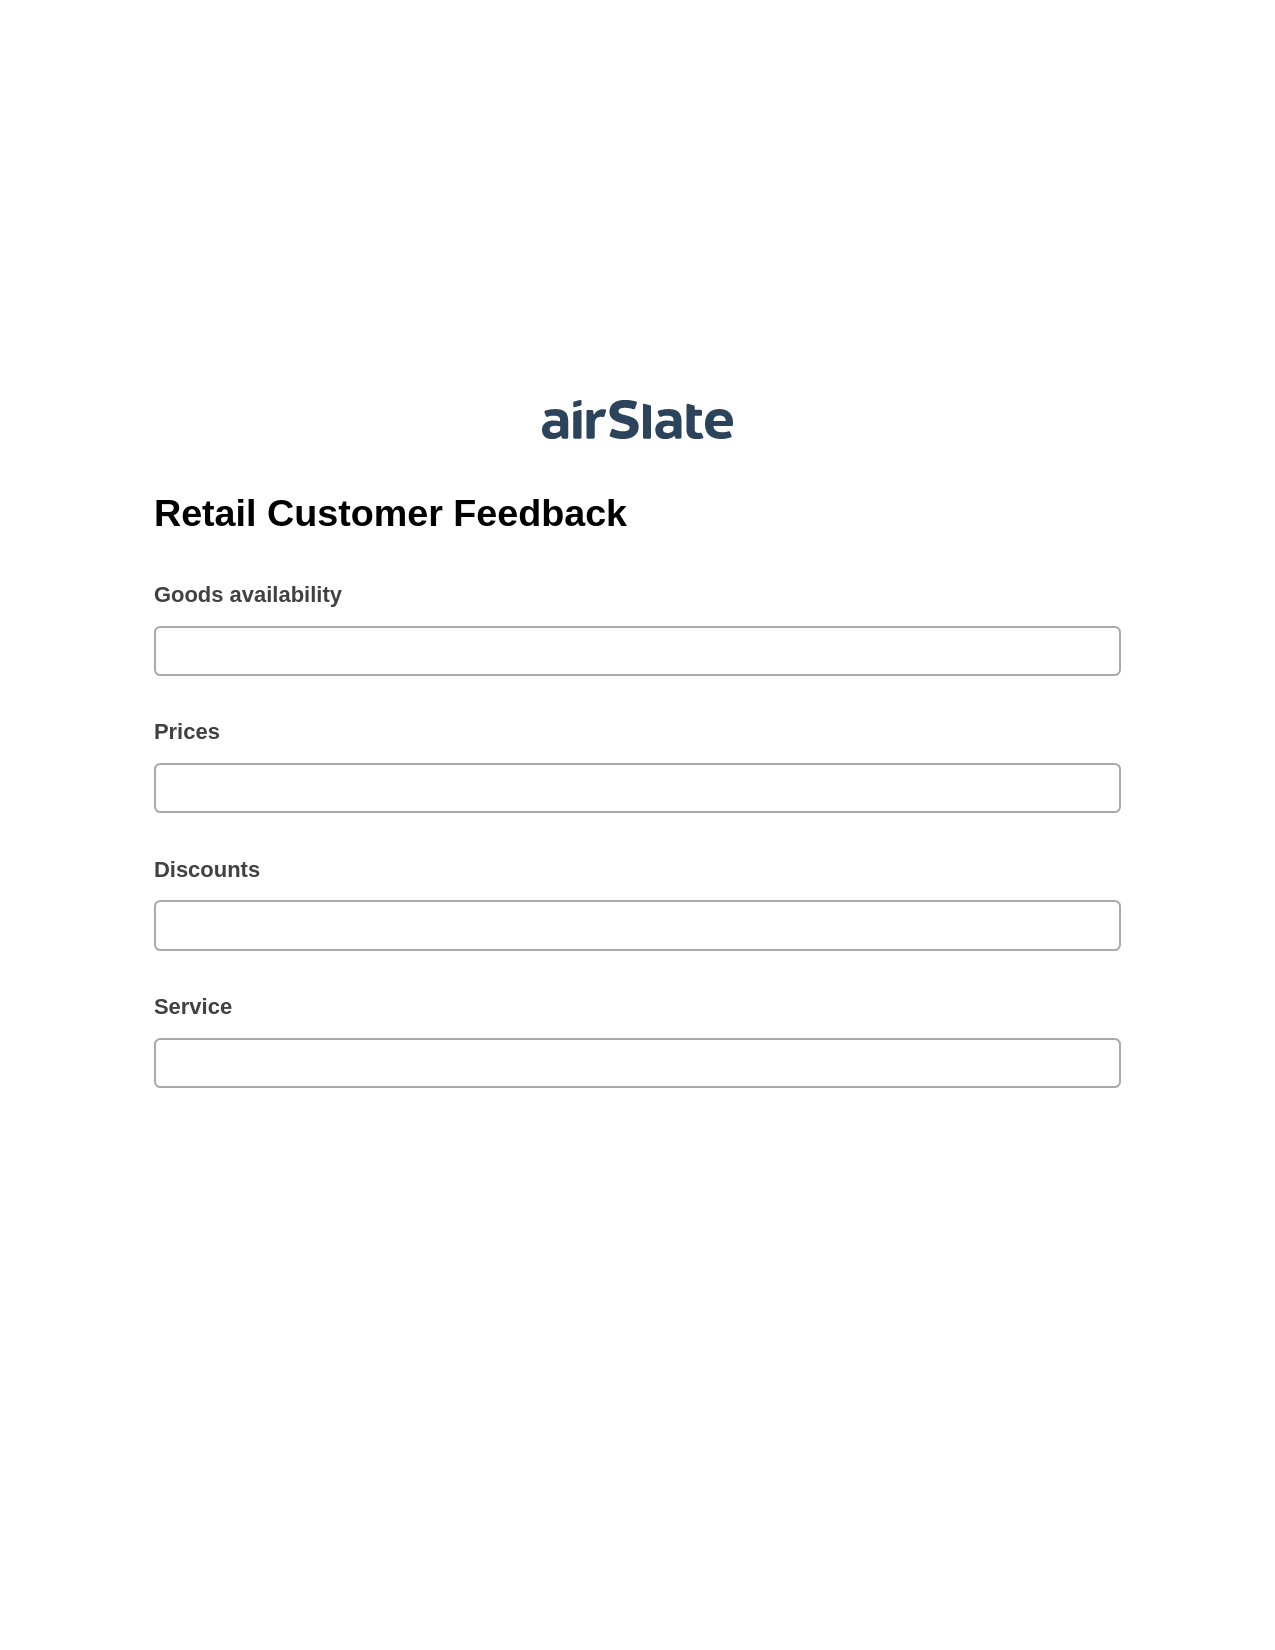 Retail Customer Feedback Pre-fill Document Bot, Assign Slate Name Bot, Export to Excel 365 Bot